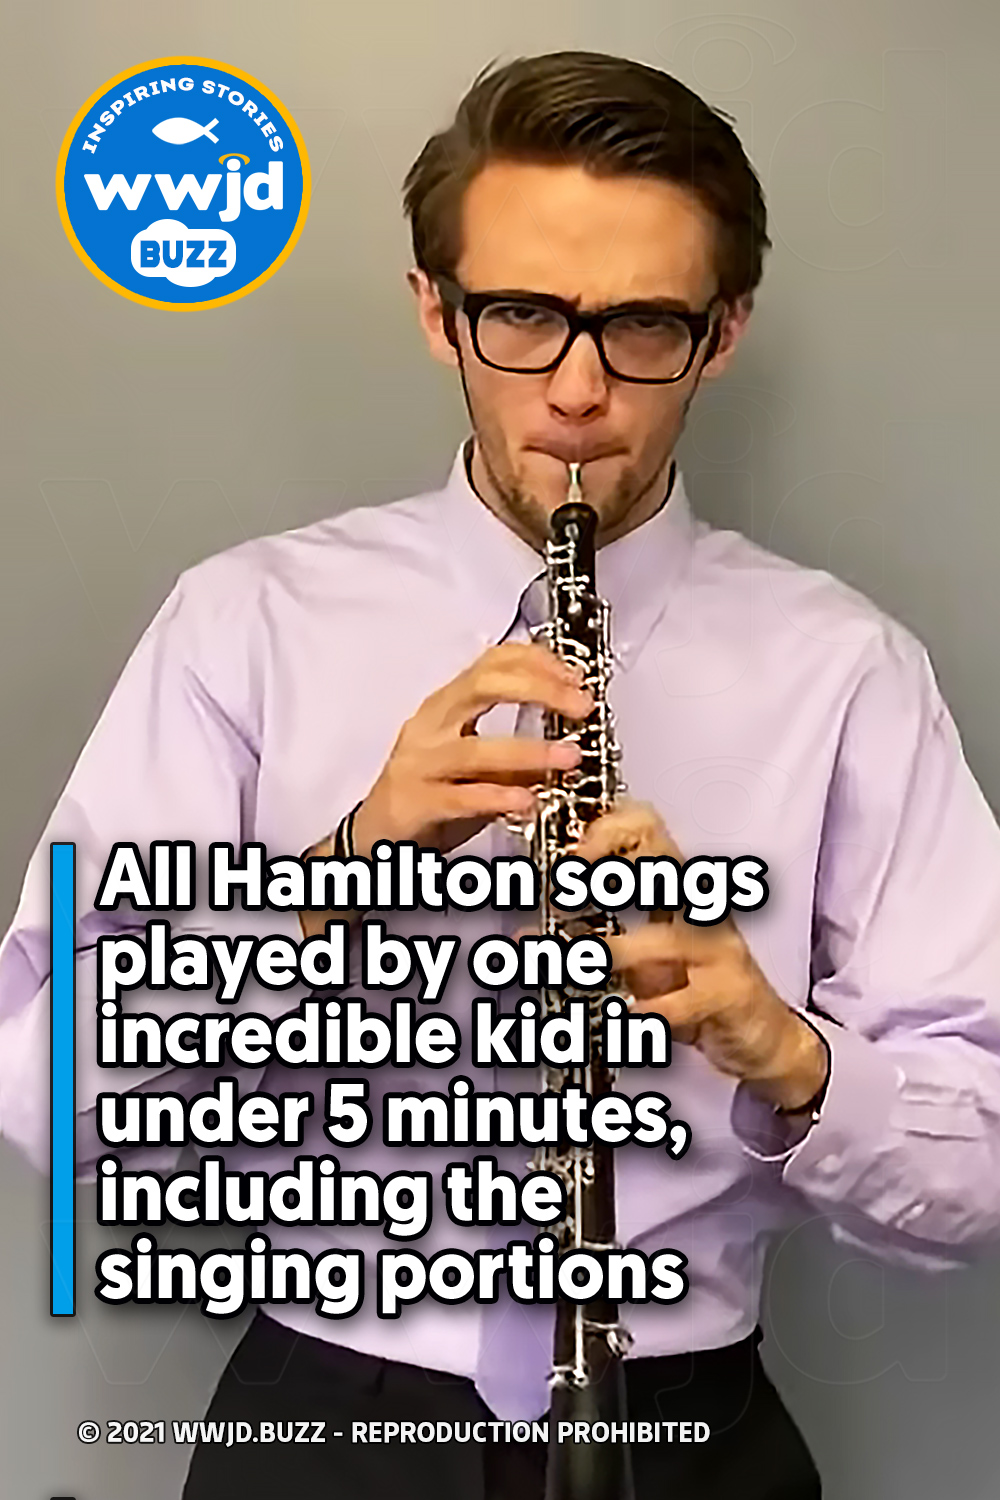 All Hamilton songs played by one incredible kid in under 5 minutes, including the singing portions